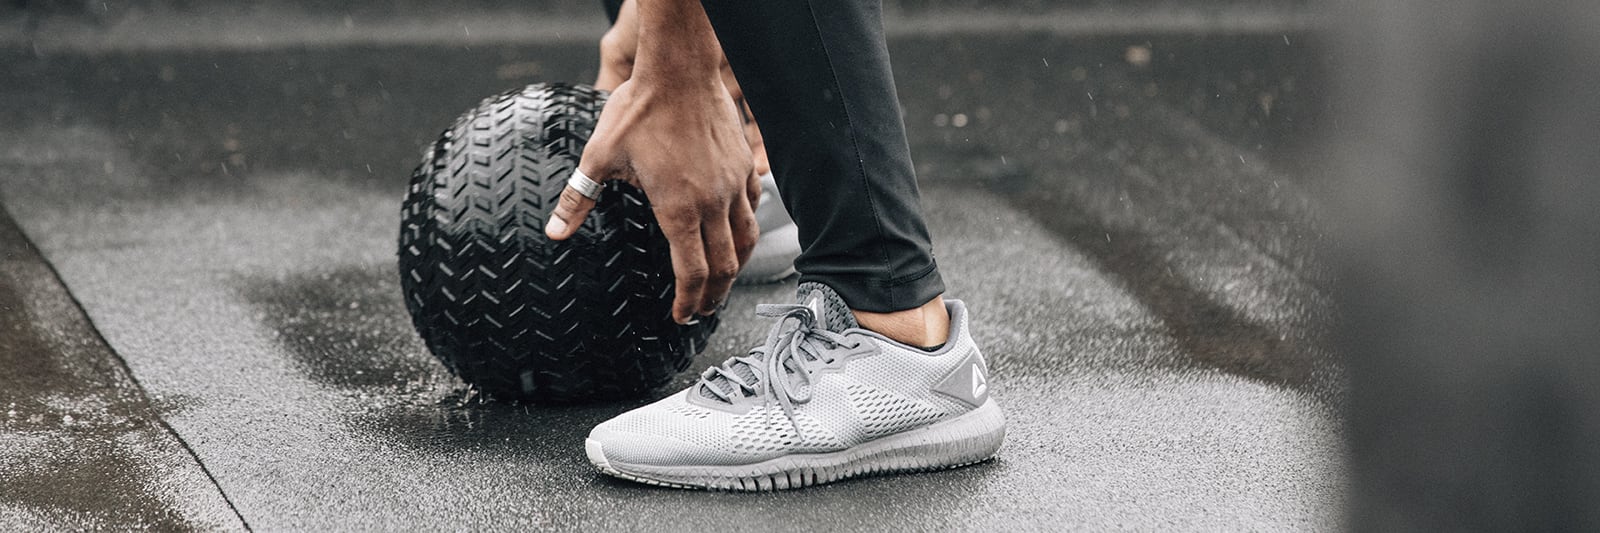 best sneakers for weight training